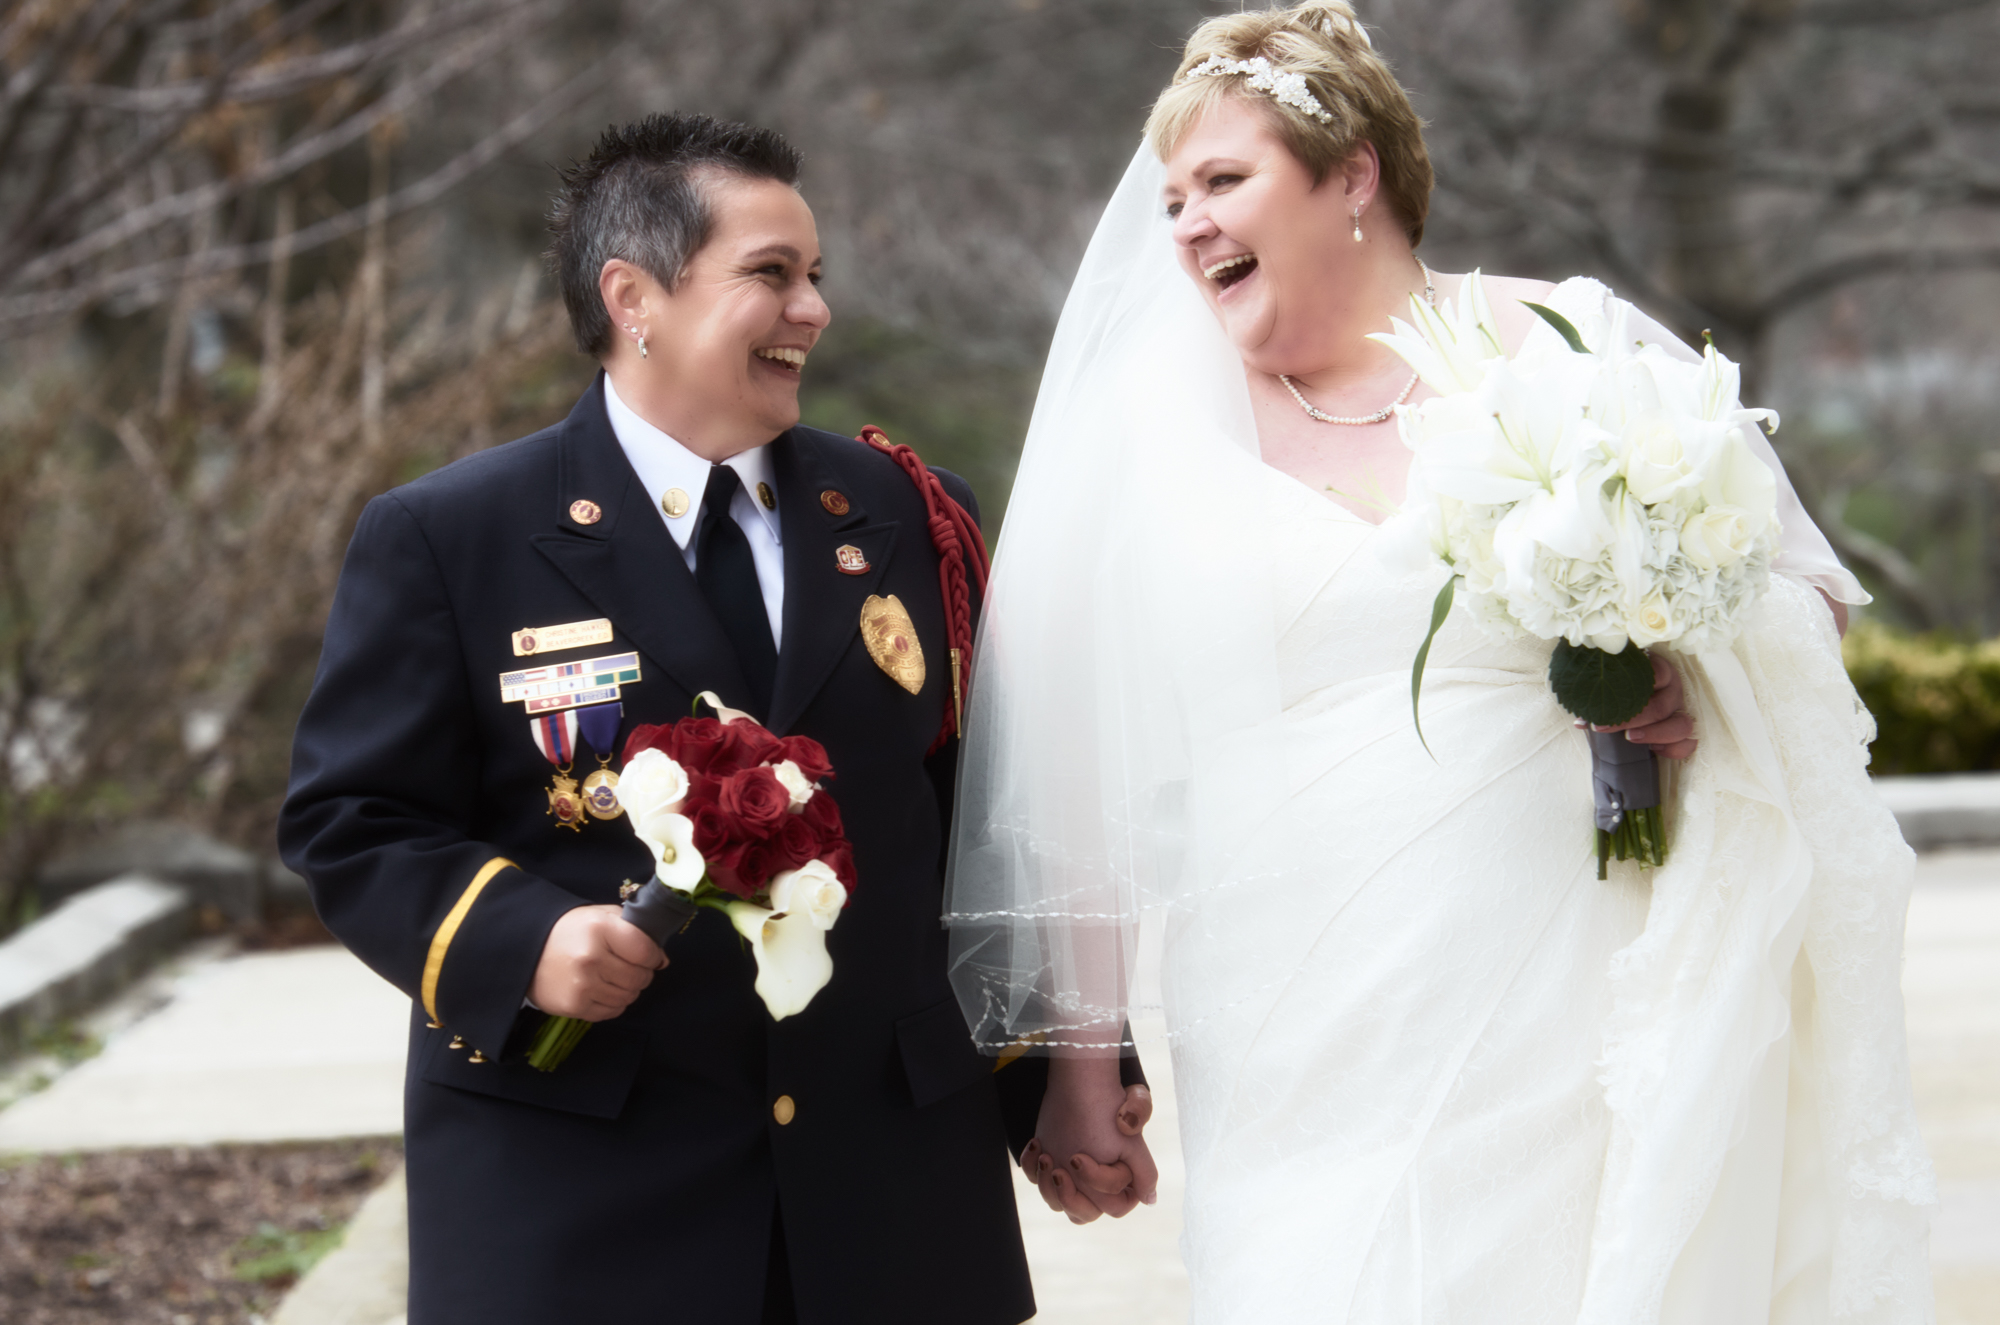 LGBTQ+ Natural Candid Photography with two Brides